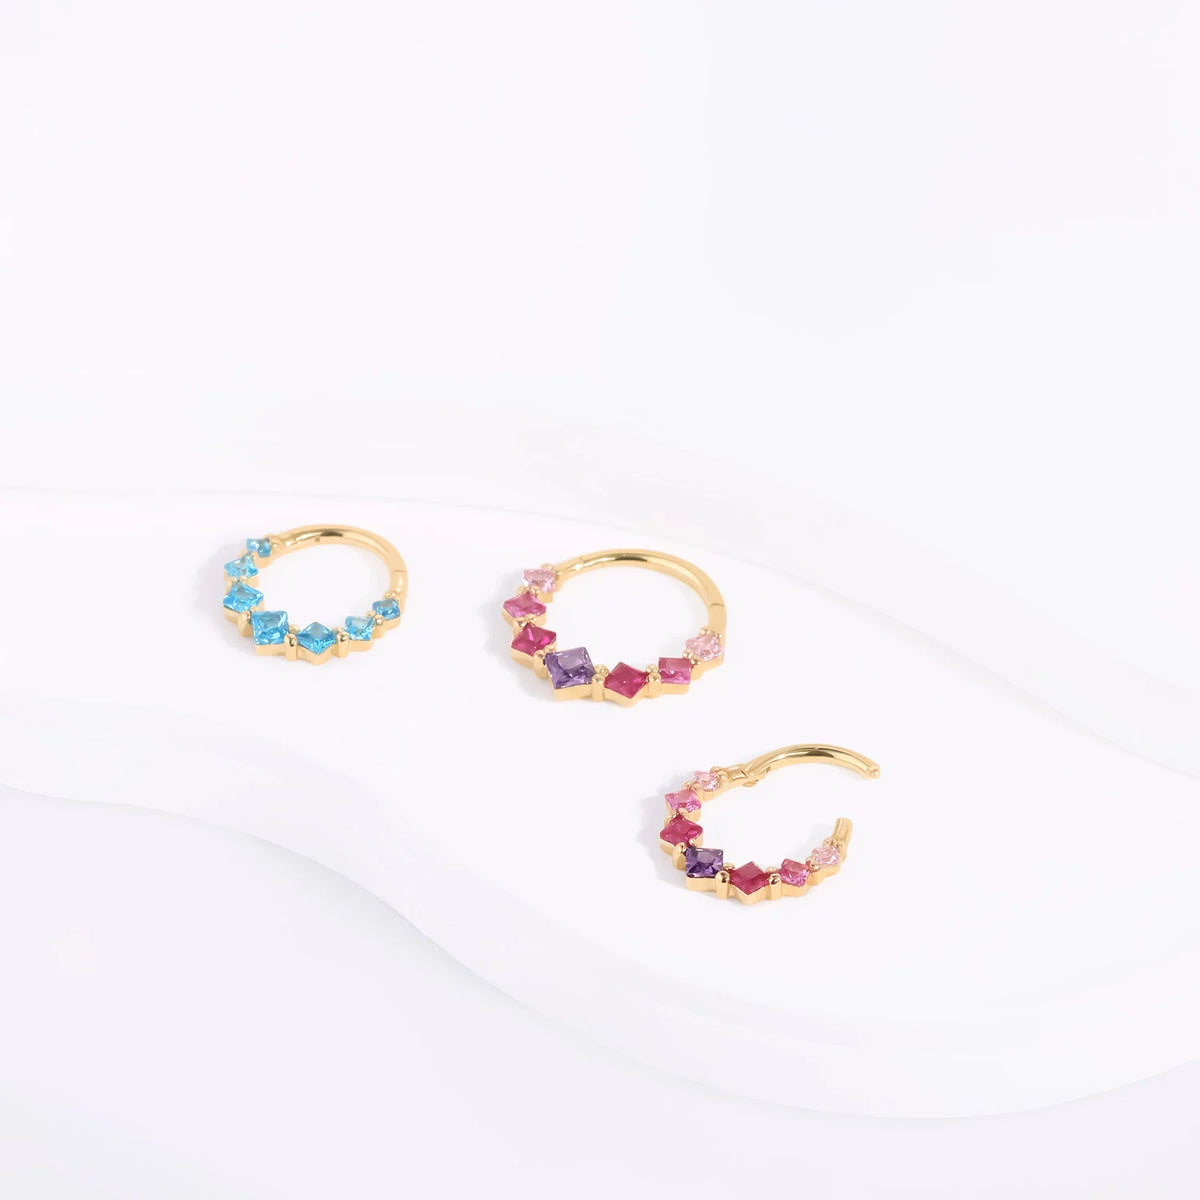 Real gold septum ring with pink blue CZ stones pretty and cute 14K gold nose ring ear piercing Daith piercing